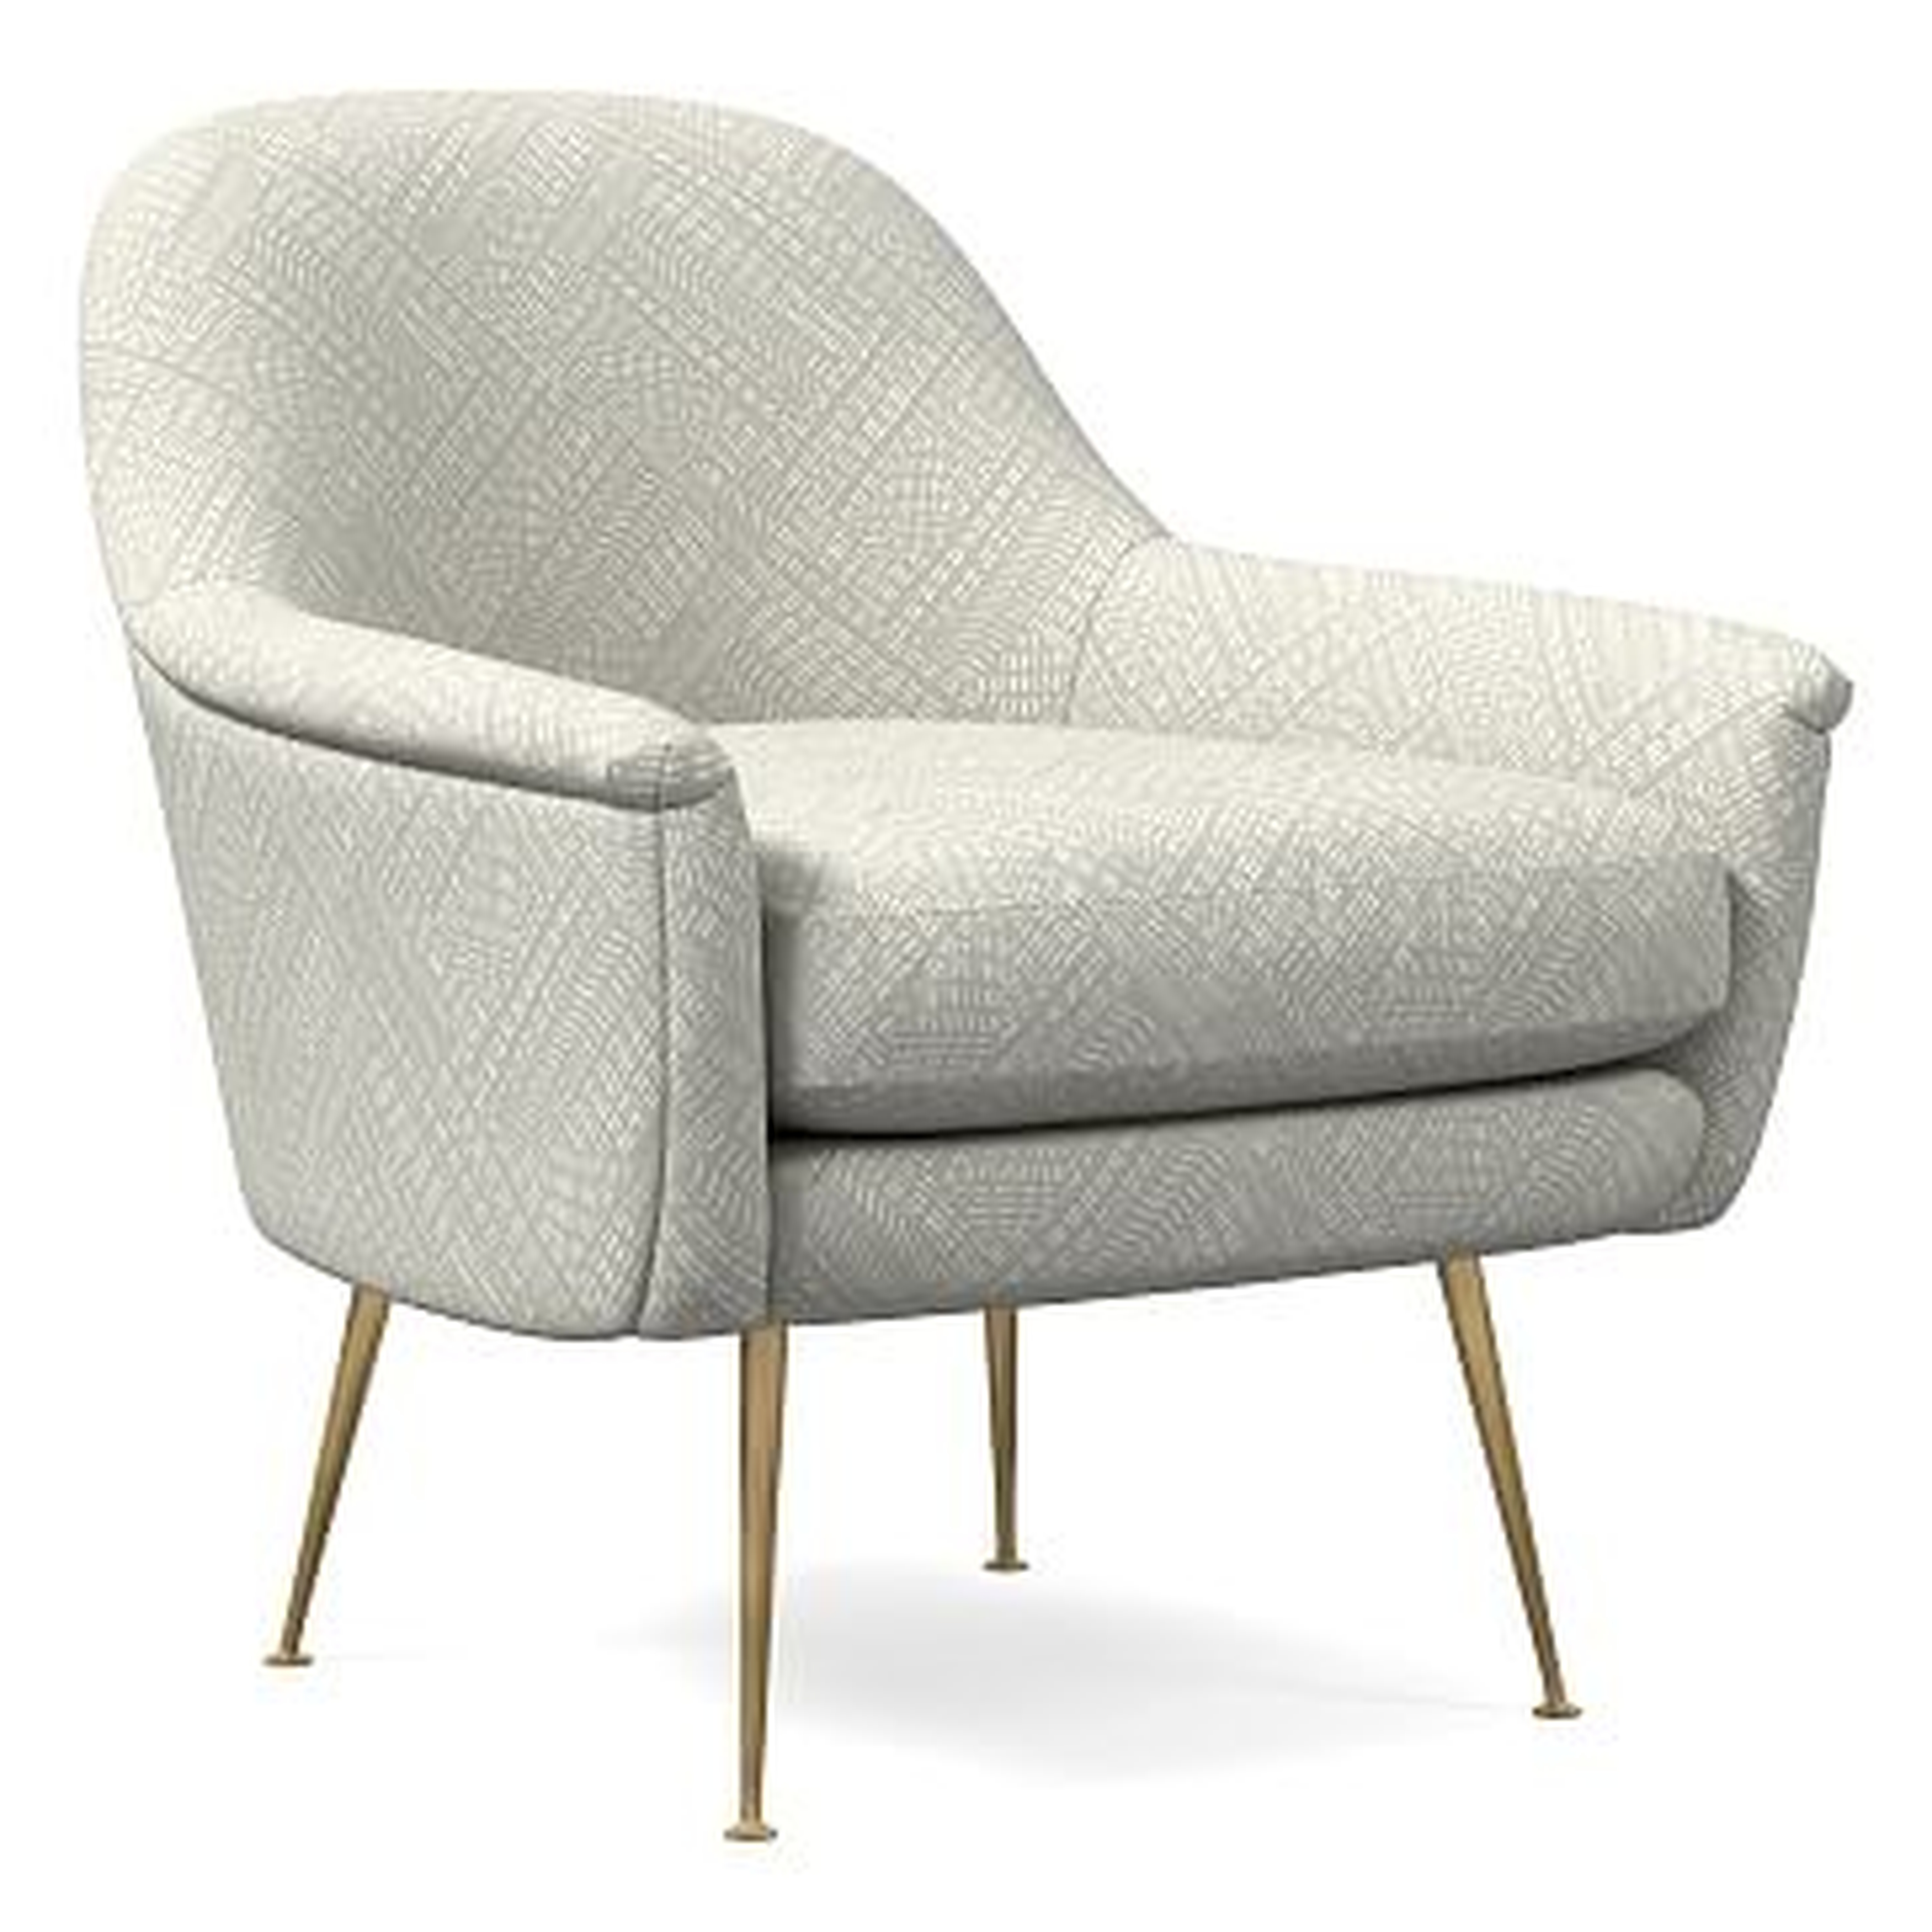 Phoebe Midcentury Chair, Line Fragments, Frost Gray, Brass - West Elm